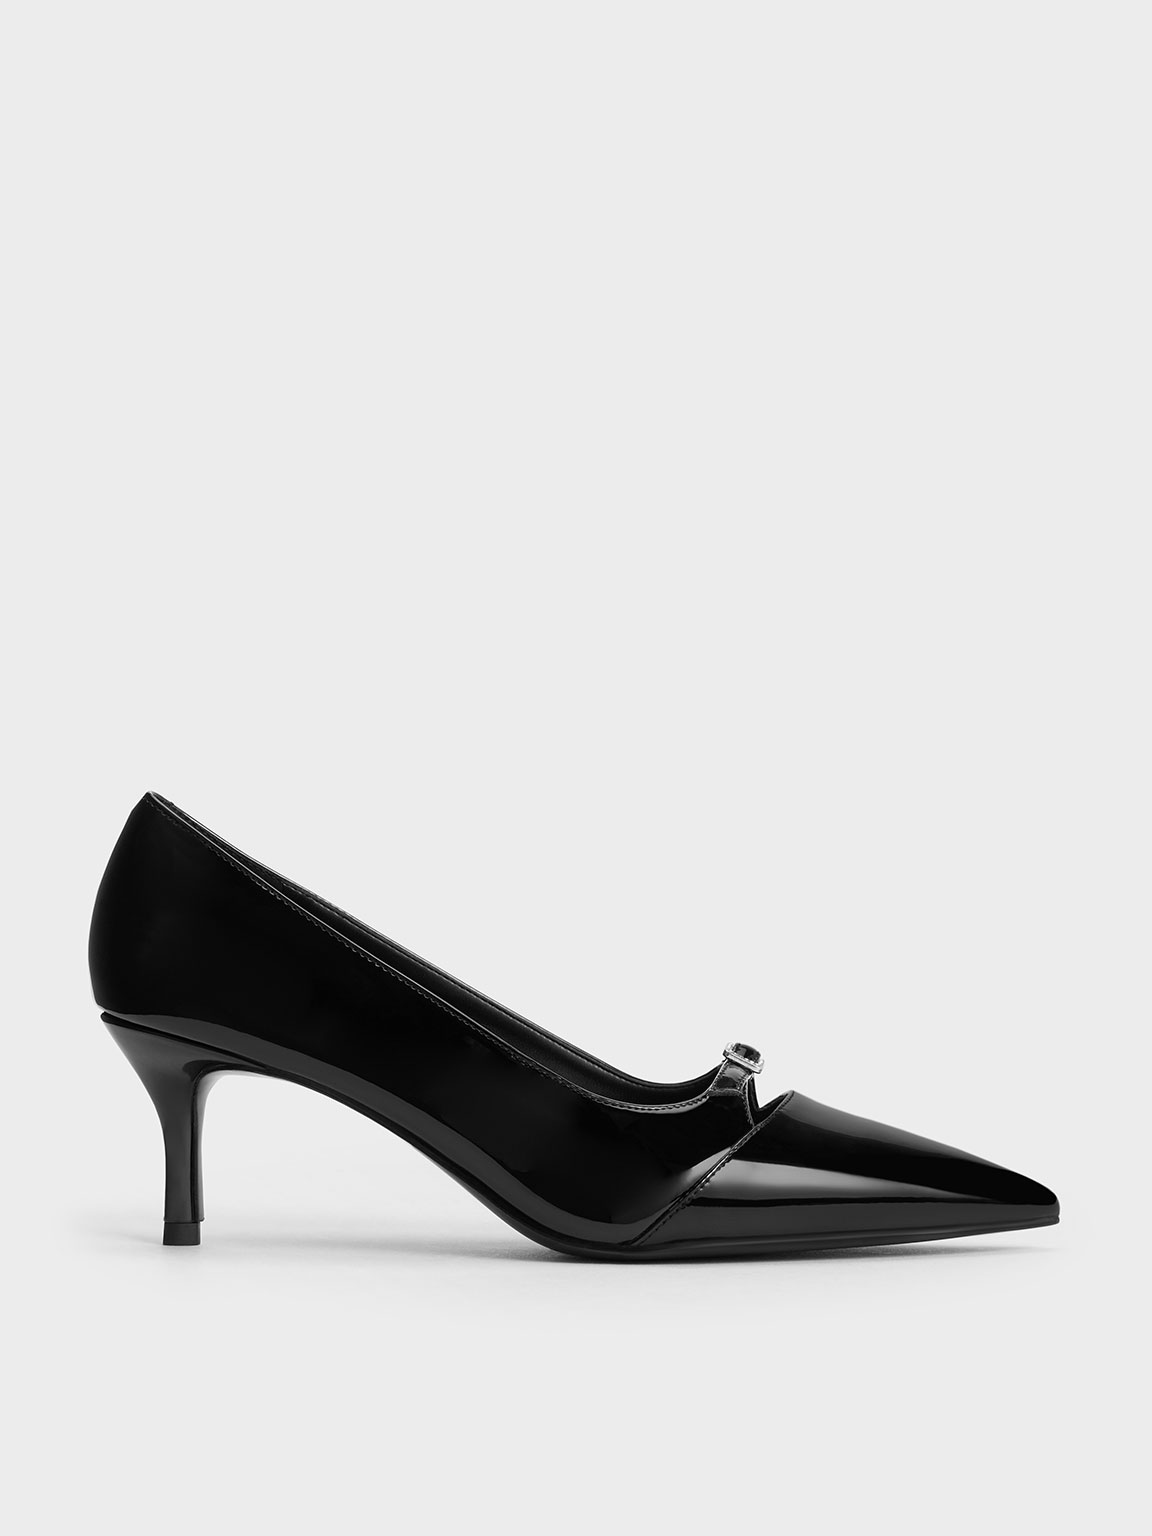 Patent Buckle-Strap Pointed-Toe Pumps